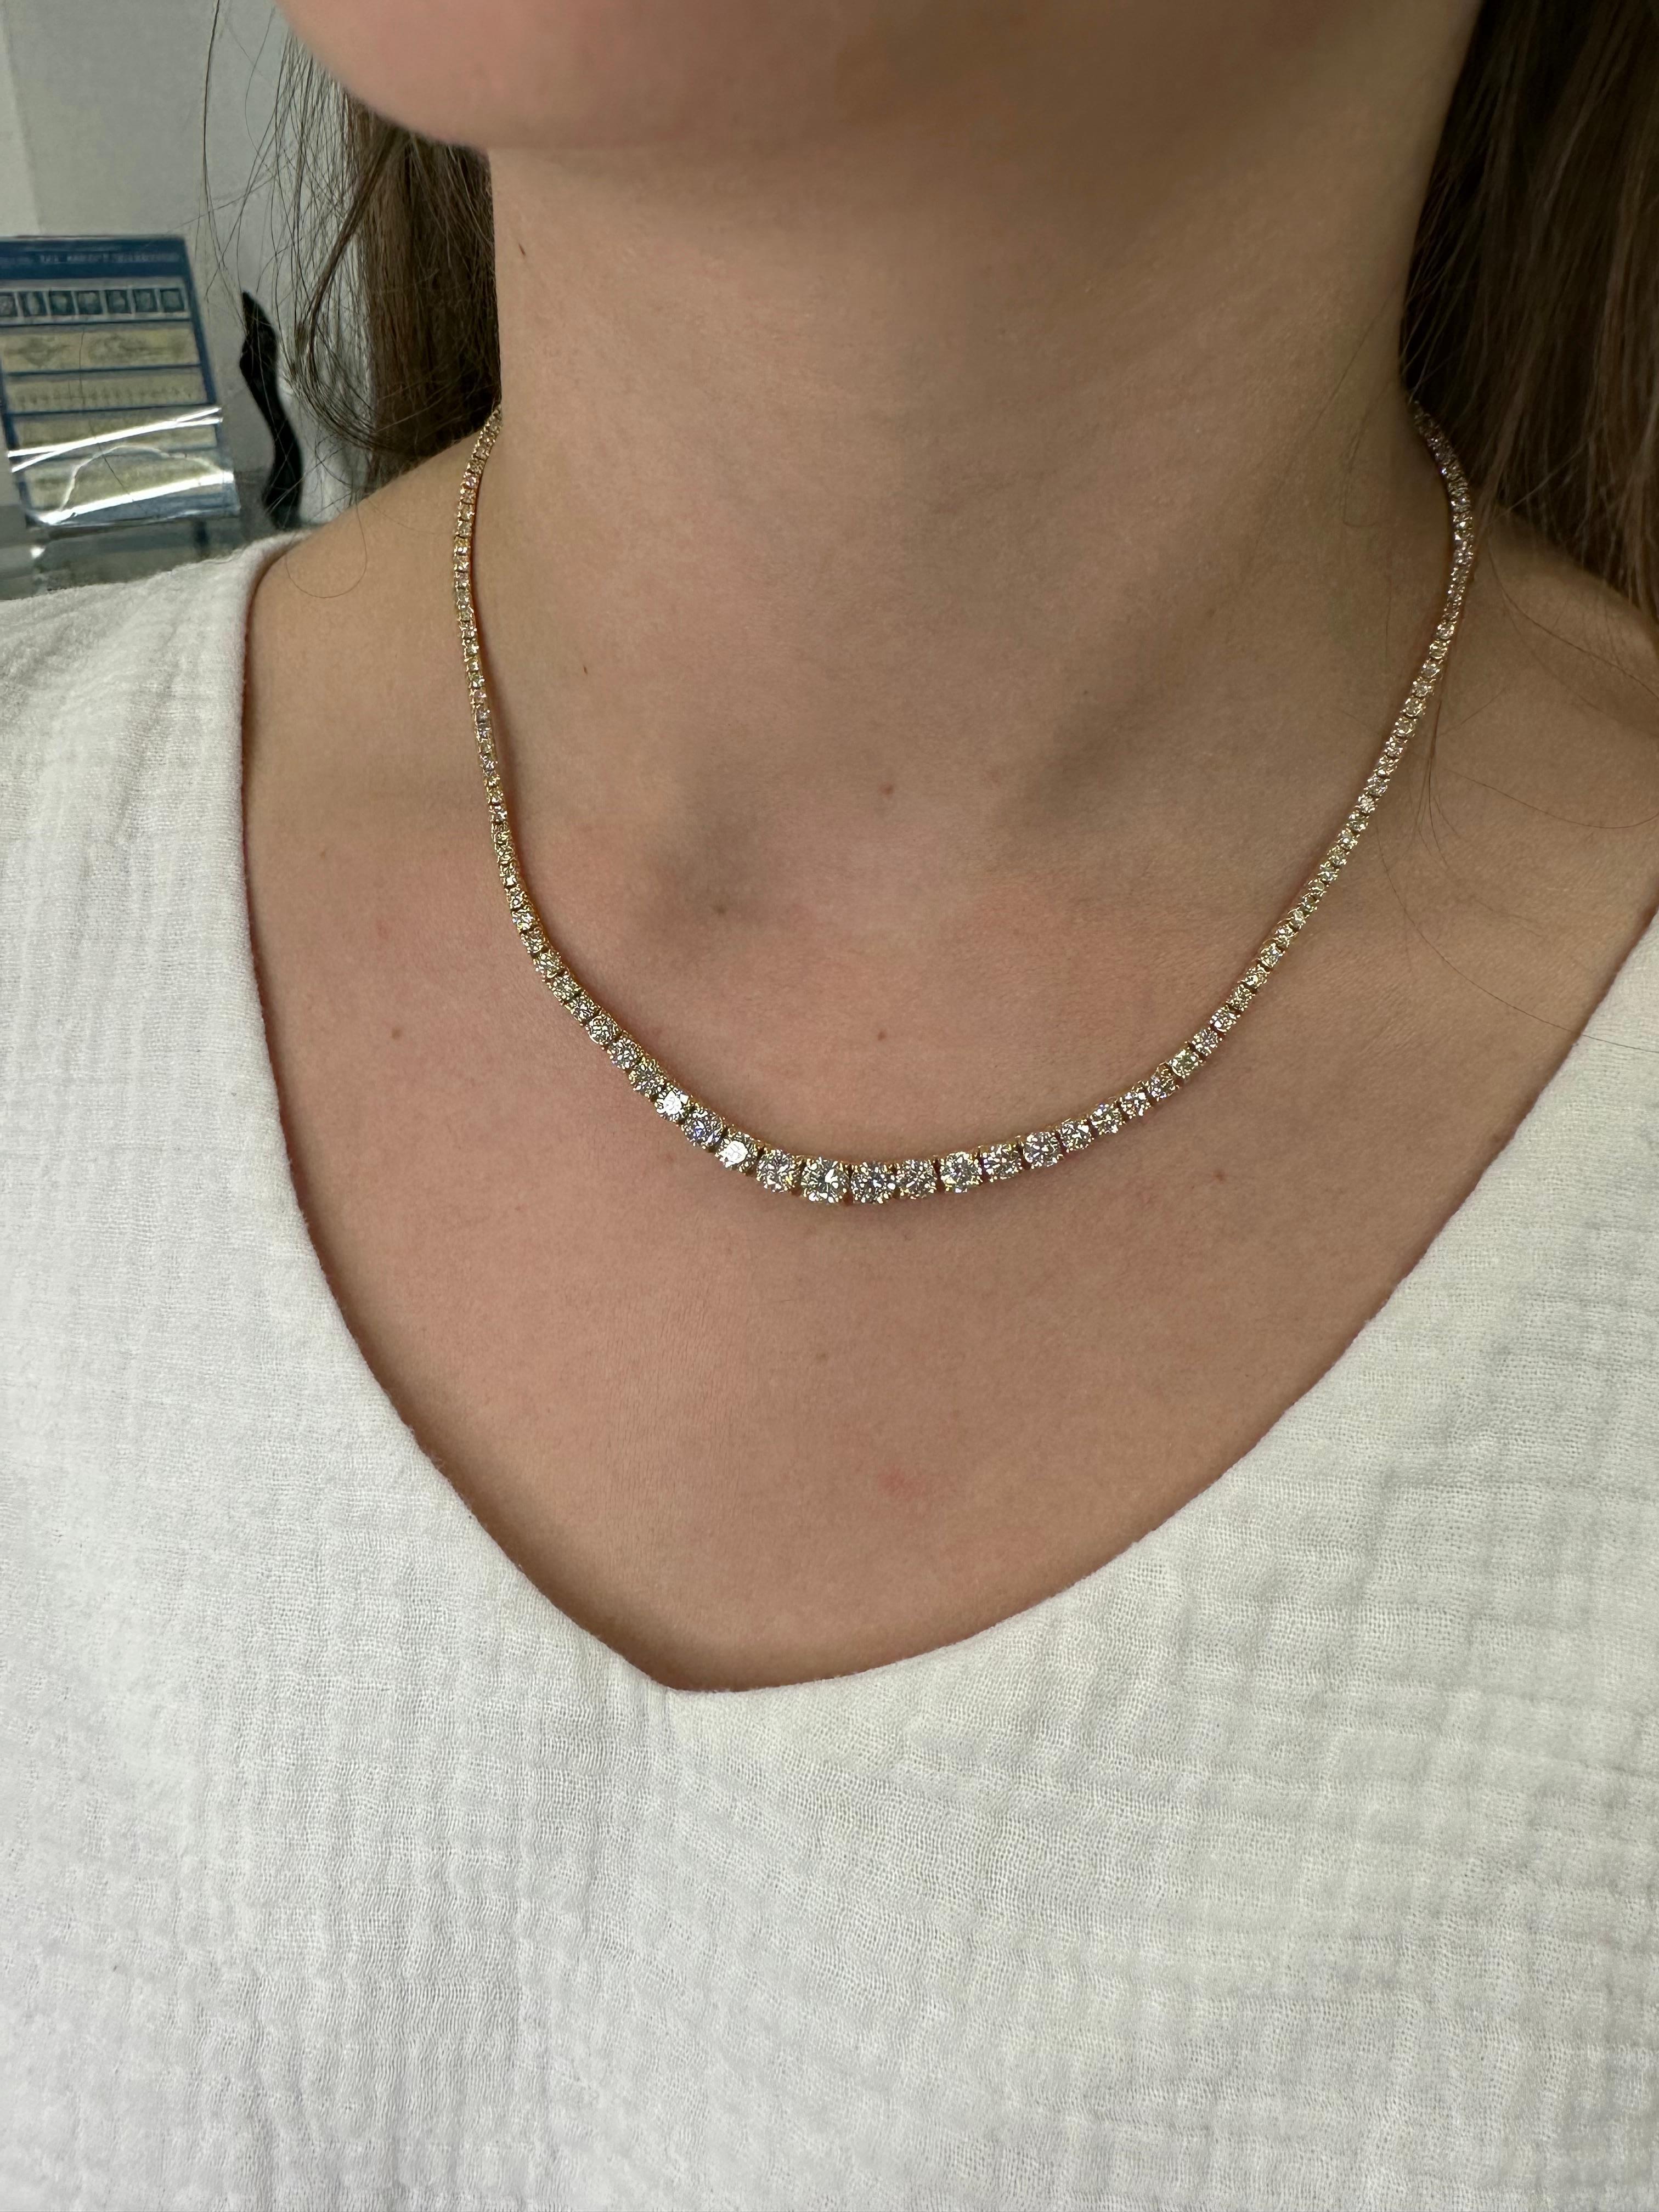 7.27 Graduated Diamond Tennis Necklace 14k Yellow Gold by Gem Jewelers Co In New Condition For Sale In Miami, FL